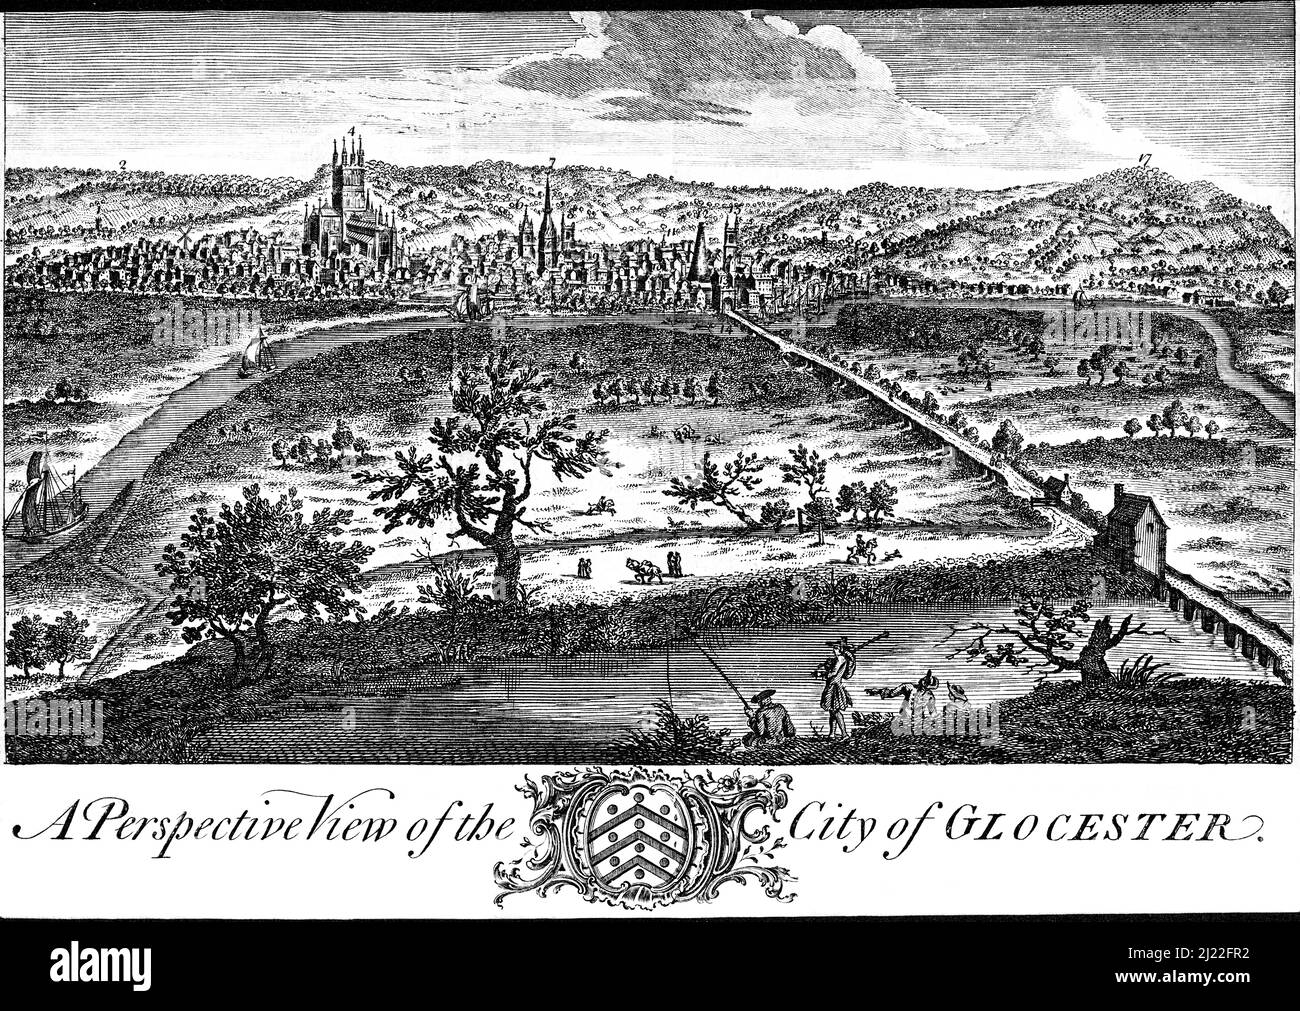 A Perspective View of the City of Glocester (Gloucester) UK scanned at high resolution from a magazine printed in 1750. Stock Photo